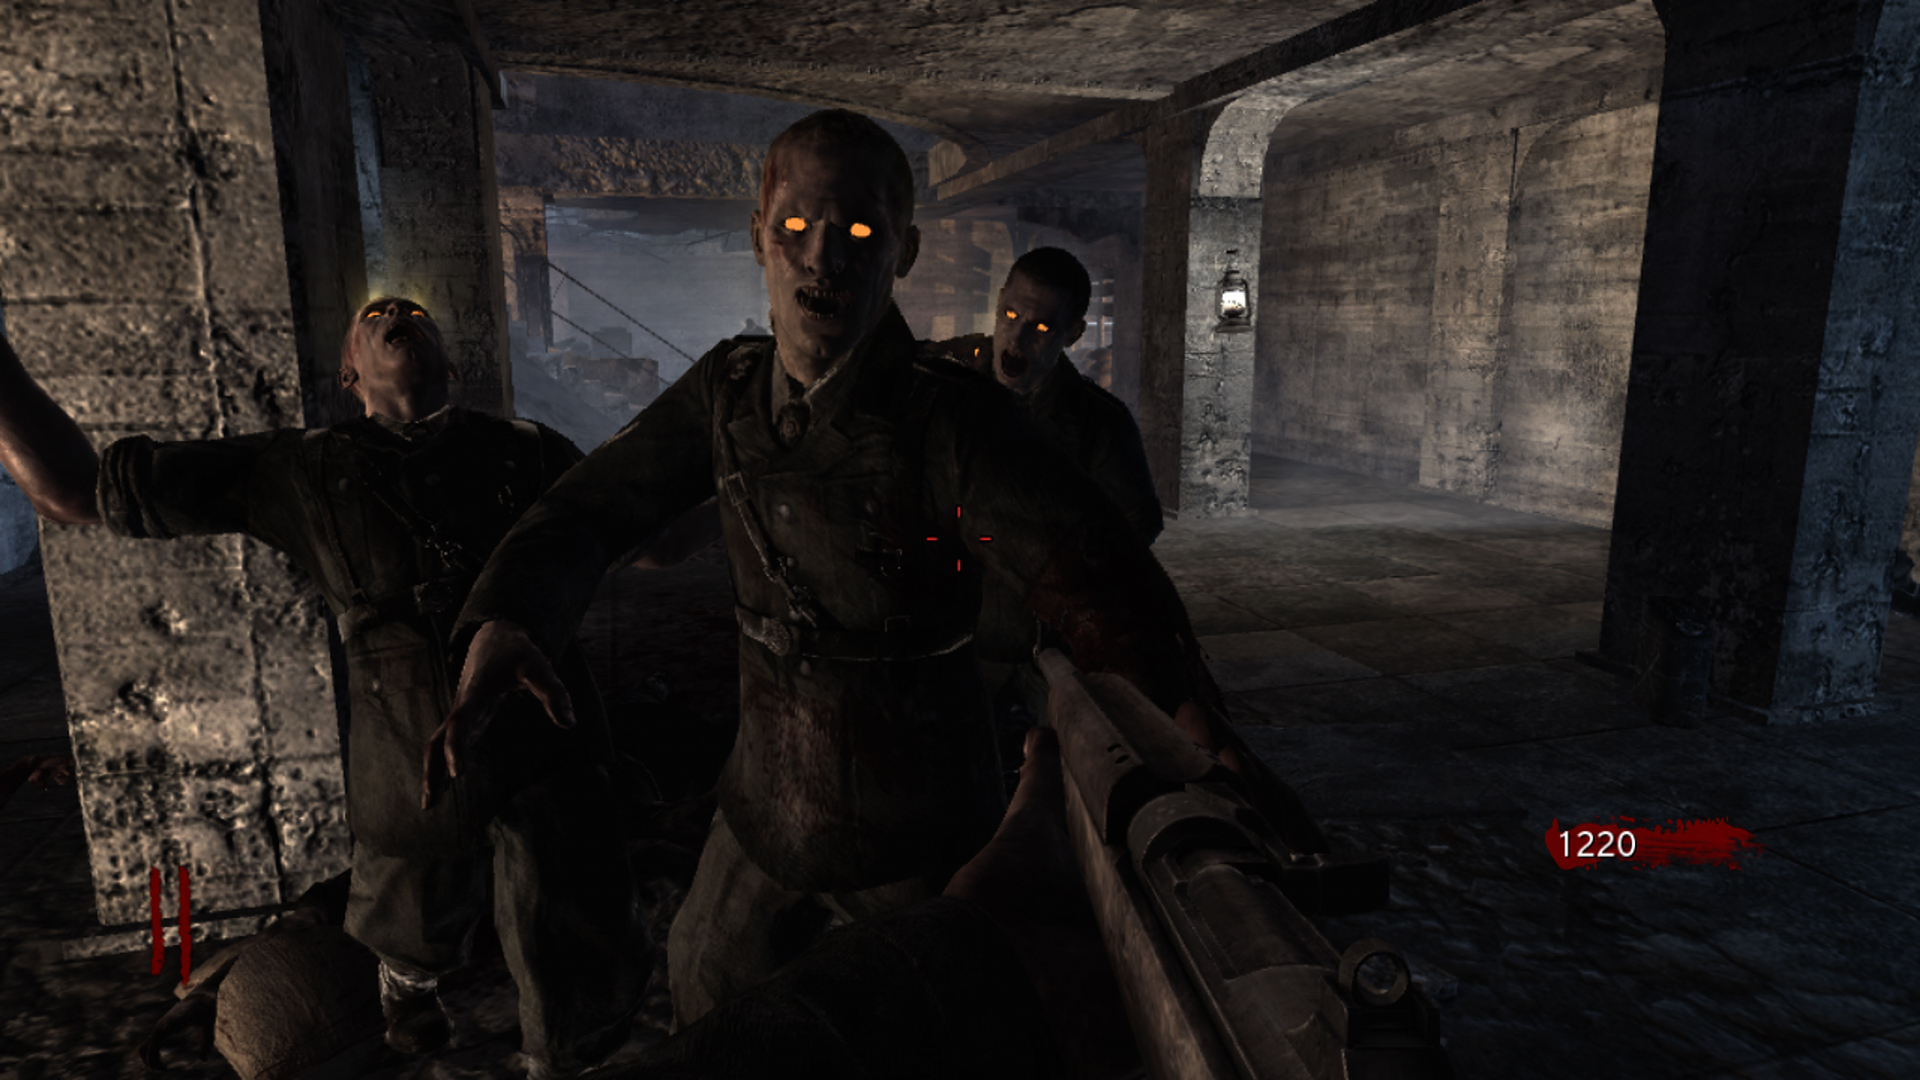 Hackers Aside, Call Of Duty: World At War Is Still Gruesome Fun